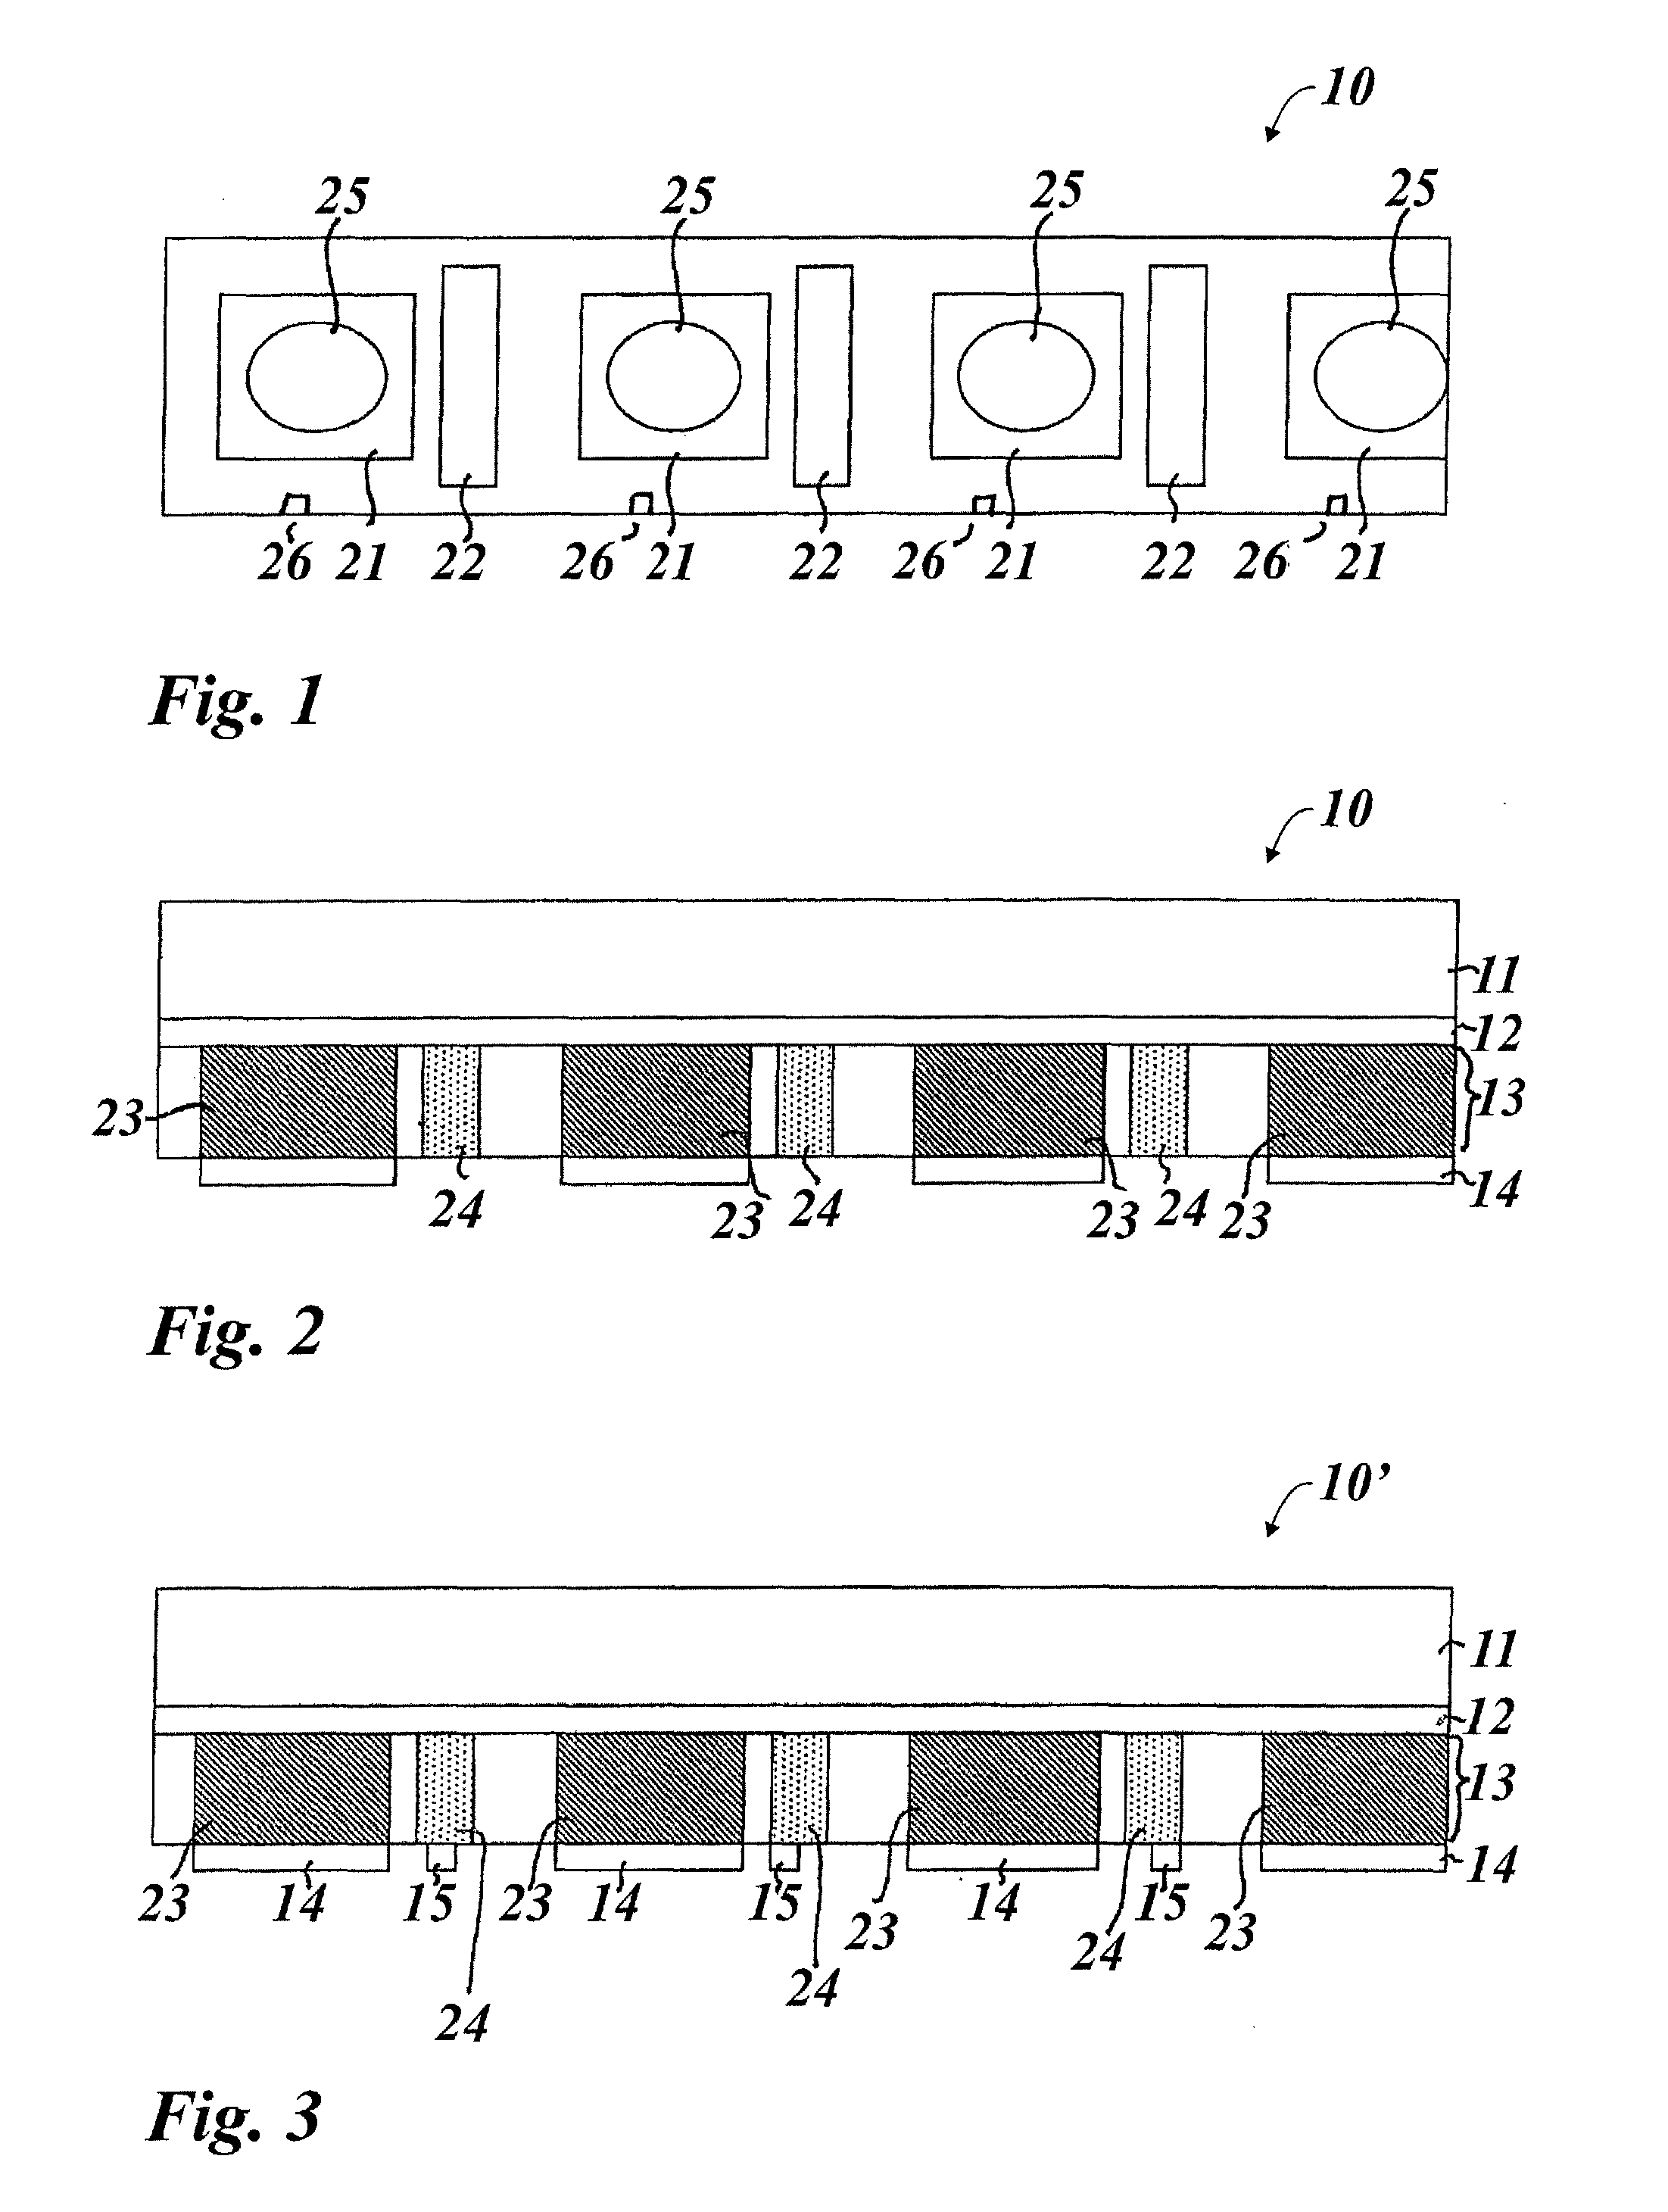 Method for decorating surfaces